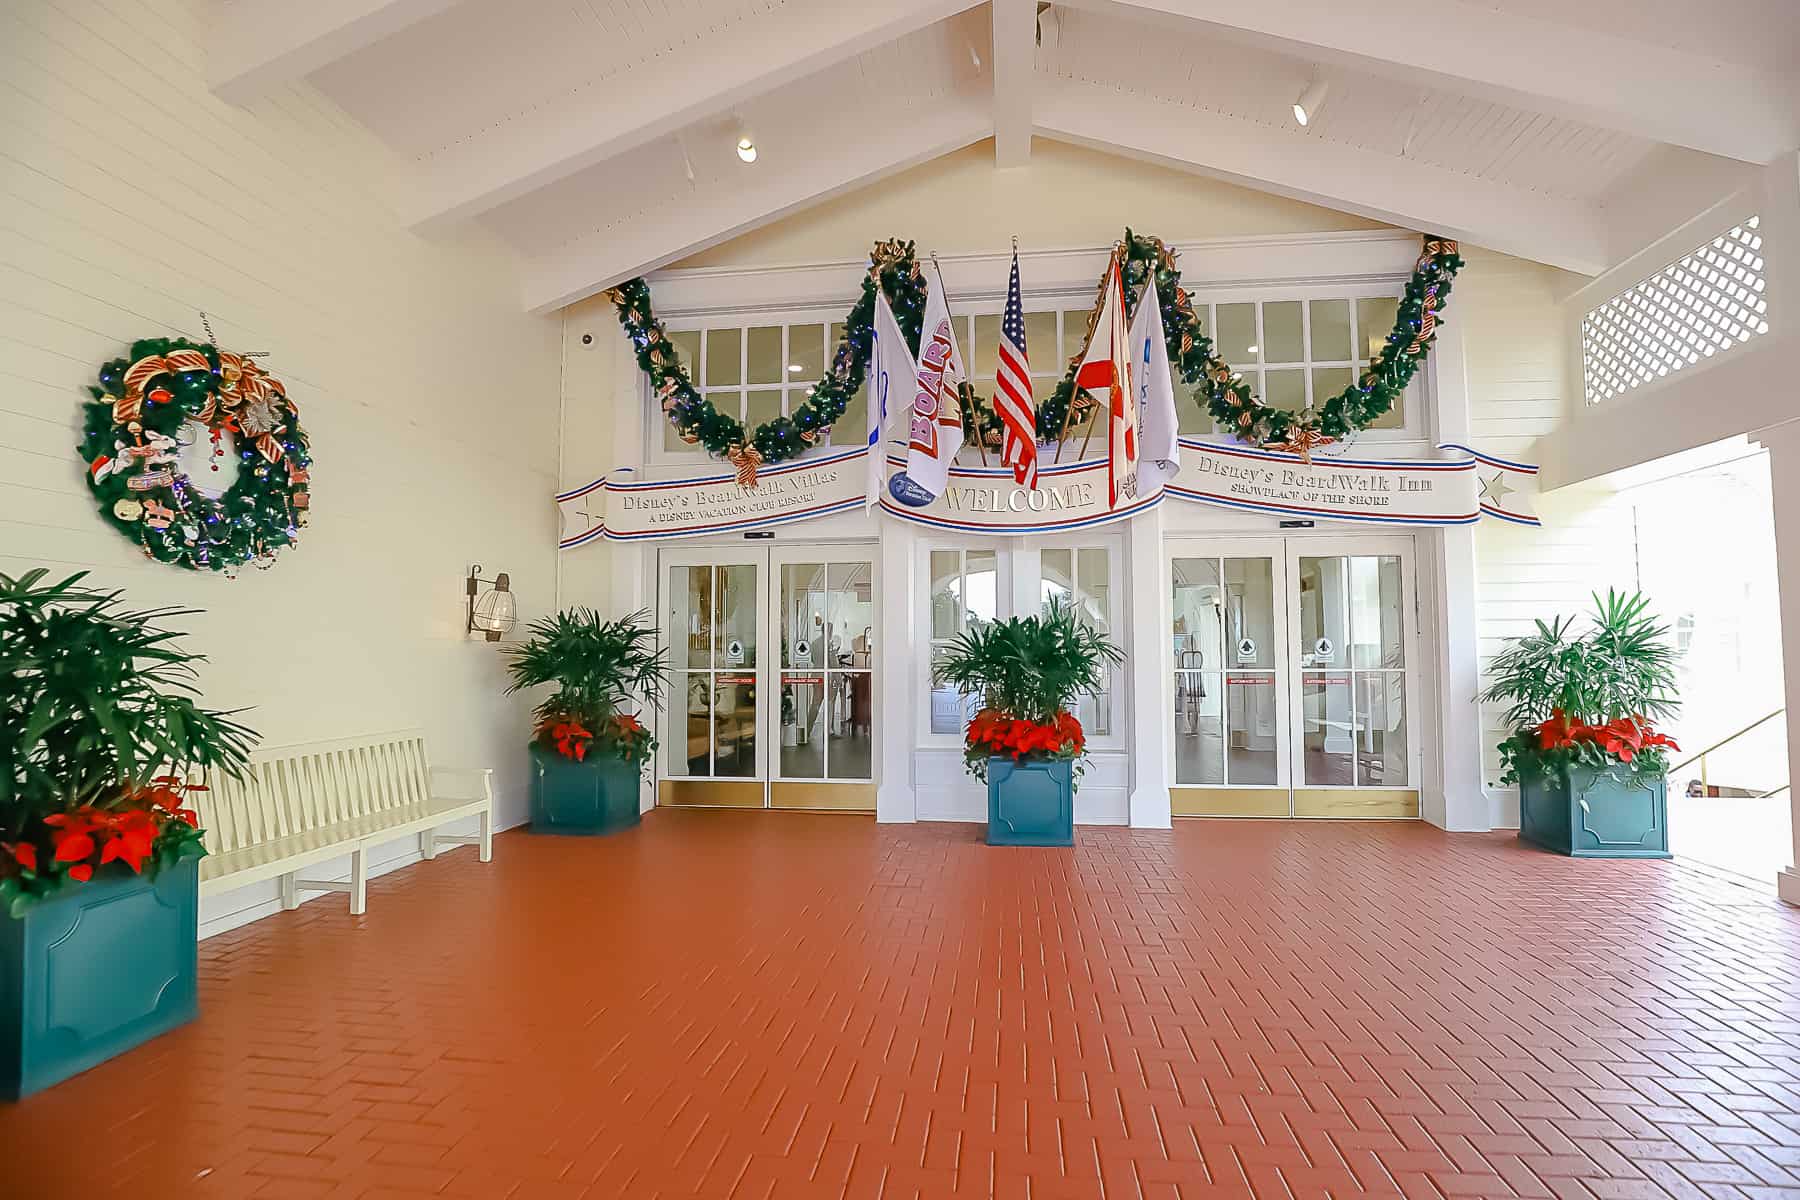 The entrance to Disney's Boardwalk decorated for Christmas.